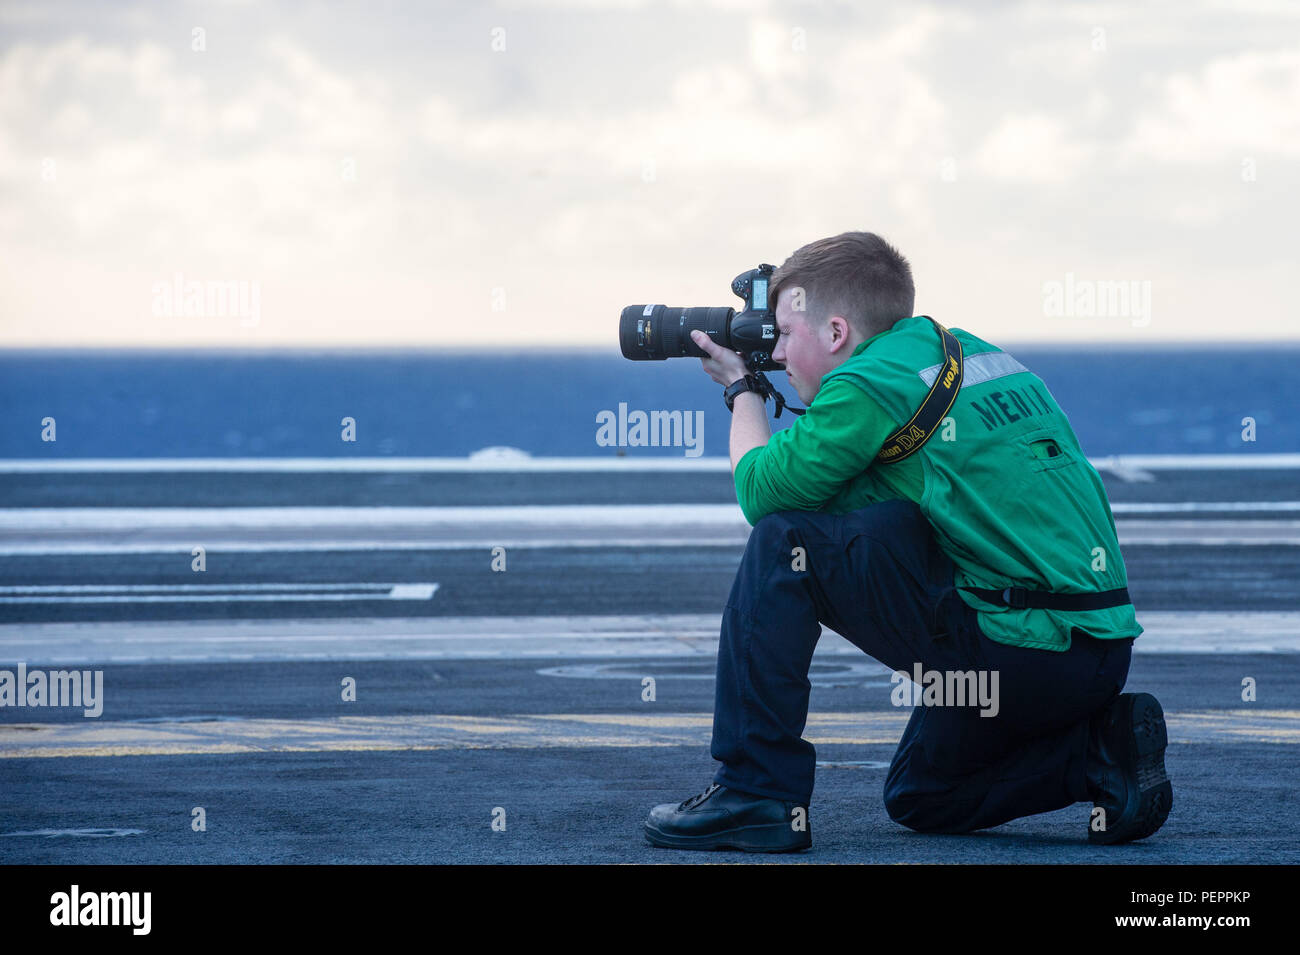 160128-N-XX566-143 PACIFIC OCEAN  (Jan. 28, 2016) - Mass Communication Specialist Seaman Cole Pielop, from Rathdrum, Idaho, takes photographs on USS John C. Stennis' (CVN 74) flight deck. Providing a combat-ready force to protect collective maritime interests, Stennis is operating as part of the Great Green Fleet on a regularly scheduled Western Pacific deployment. (U.S. Navy photo by Mass Communication Specialist 3rd Class Andre T. Richard/ Released) Stock Photo